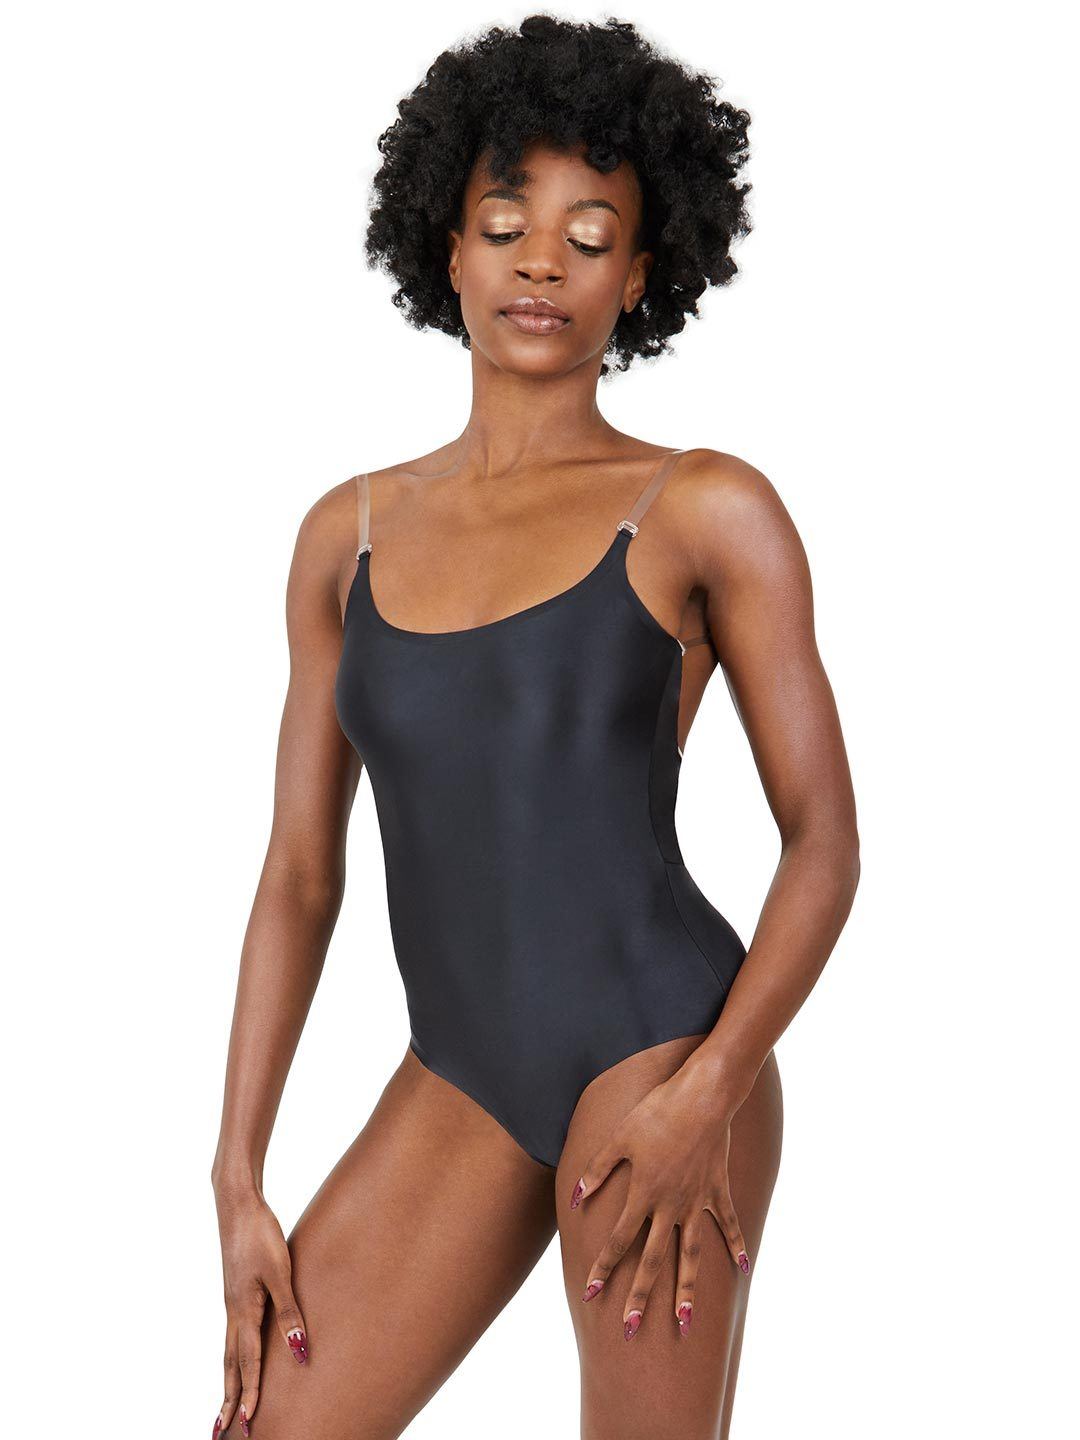 Capezio Camisole Second Skin With BraTek – And All That Jazz